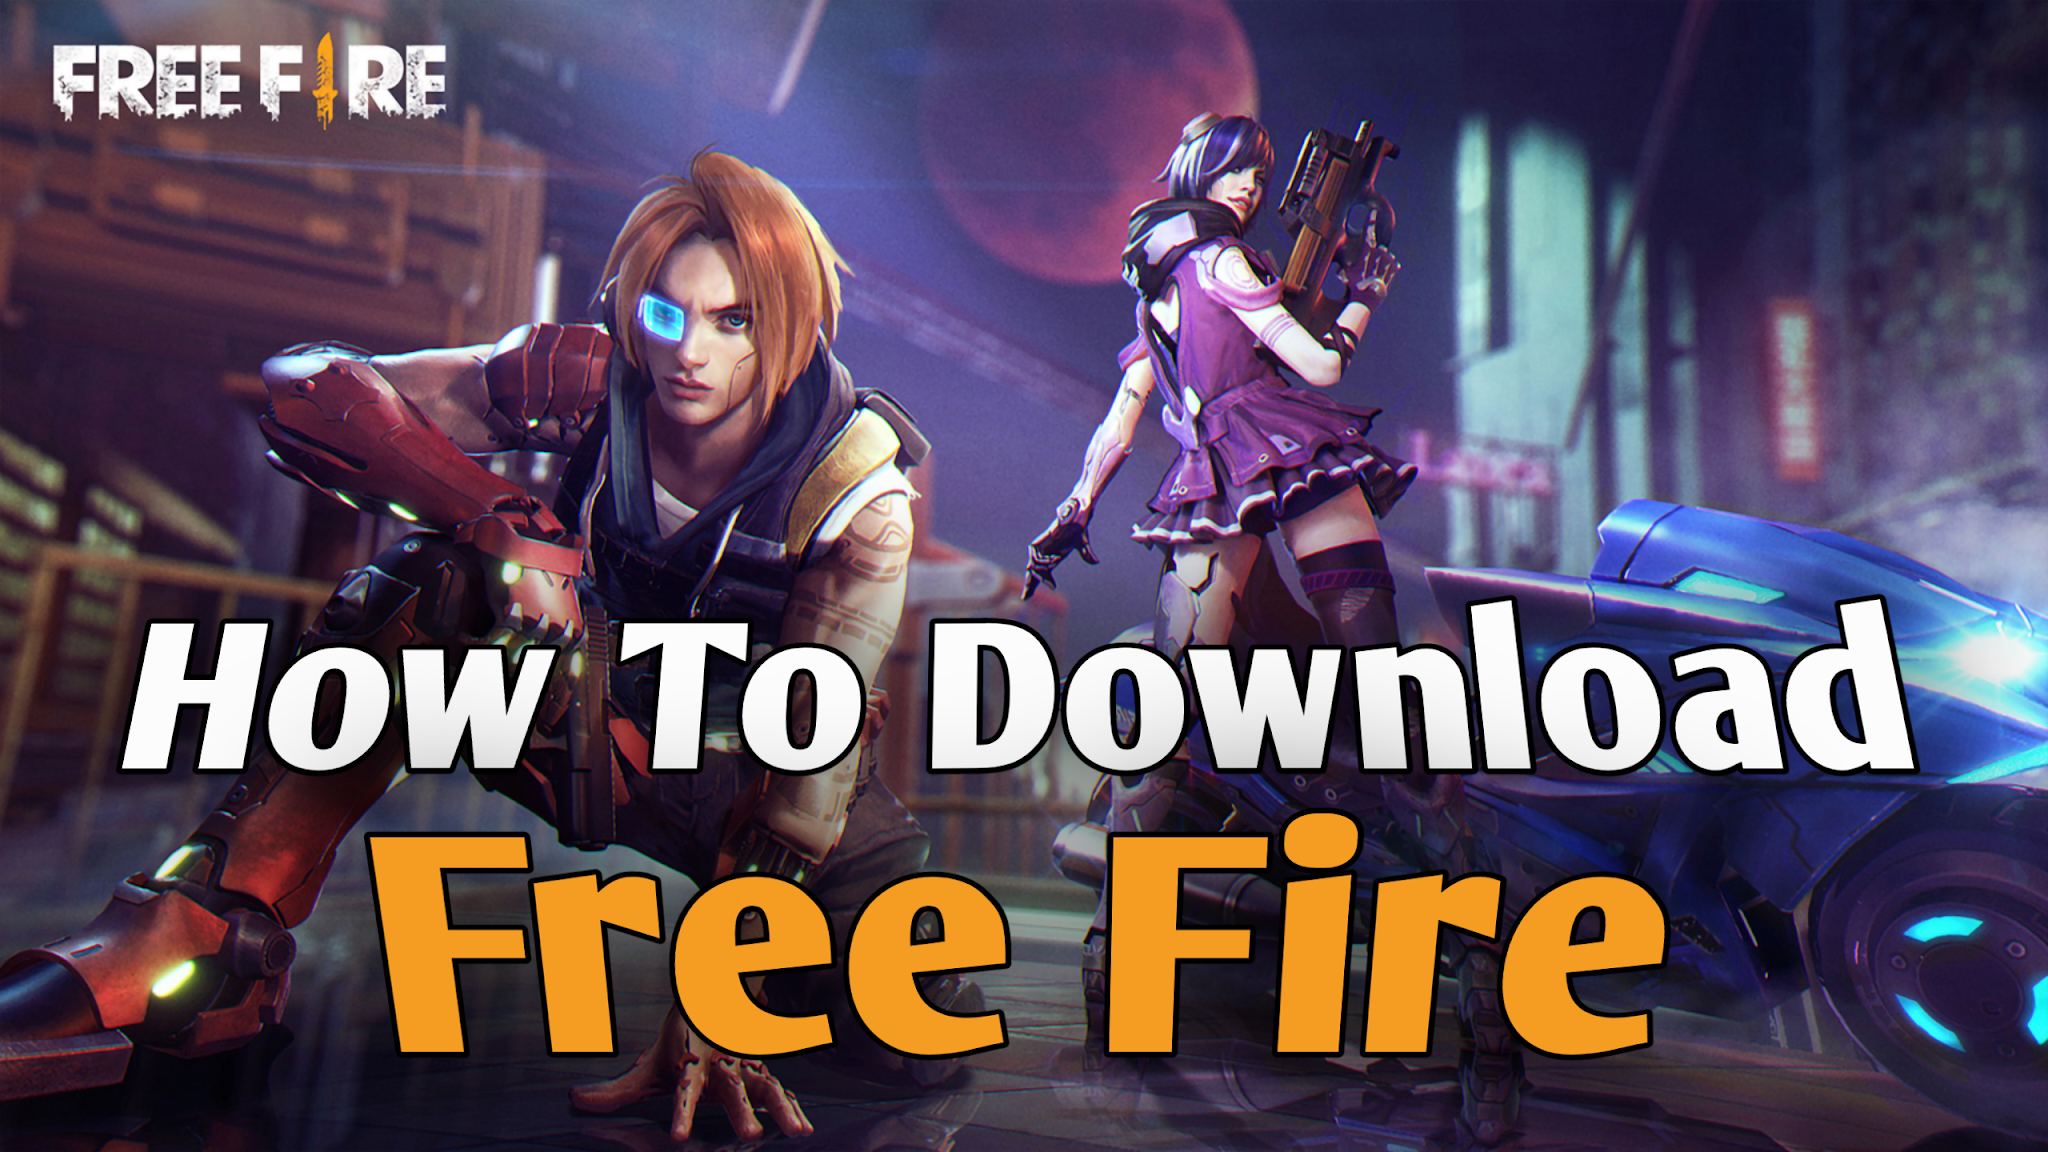 How to download Free Fire